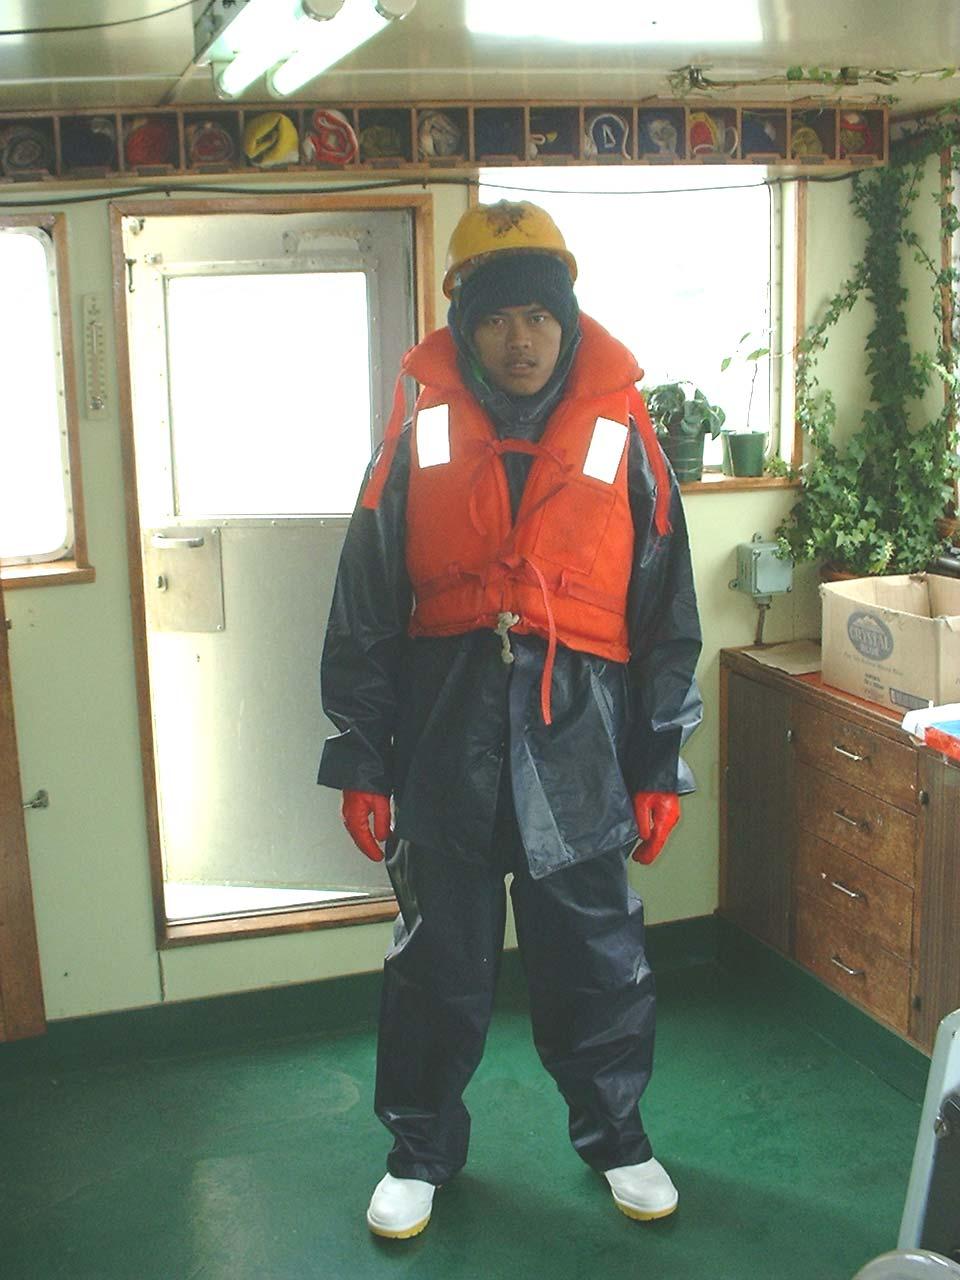 DECK GEAR AS WORN BY DECKHAND 1. At 0810 hours, Deckhand 1 and 2 were working on the net positioned near the main winches, situated forward and on the starboard side of the deck.